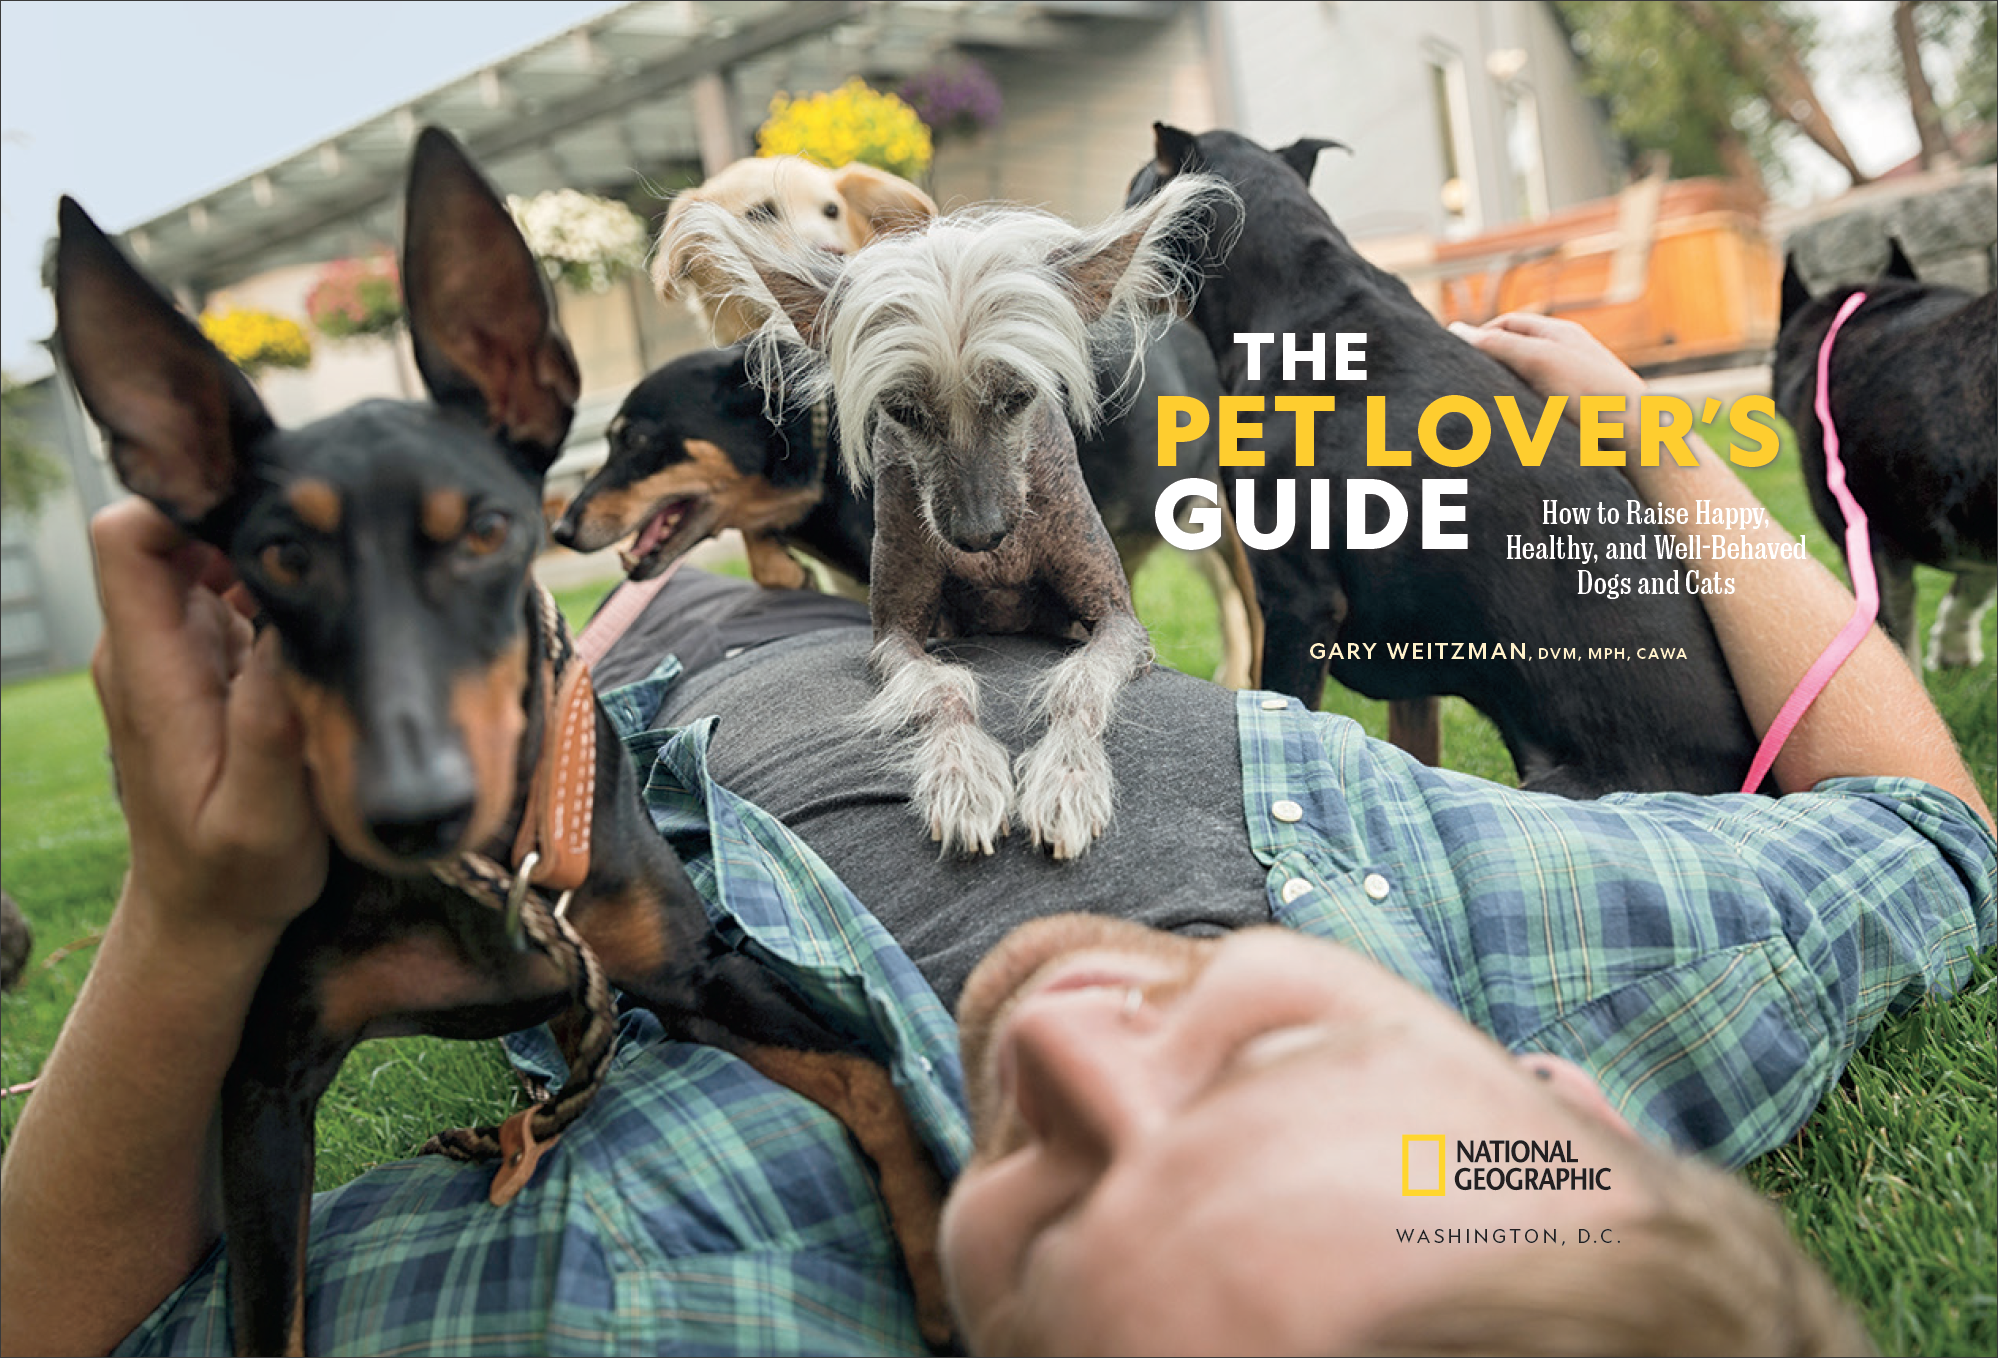 The Pet Lover's Guide, National Geographic, 2021